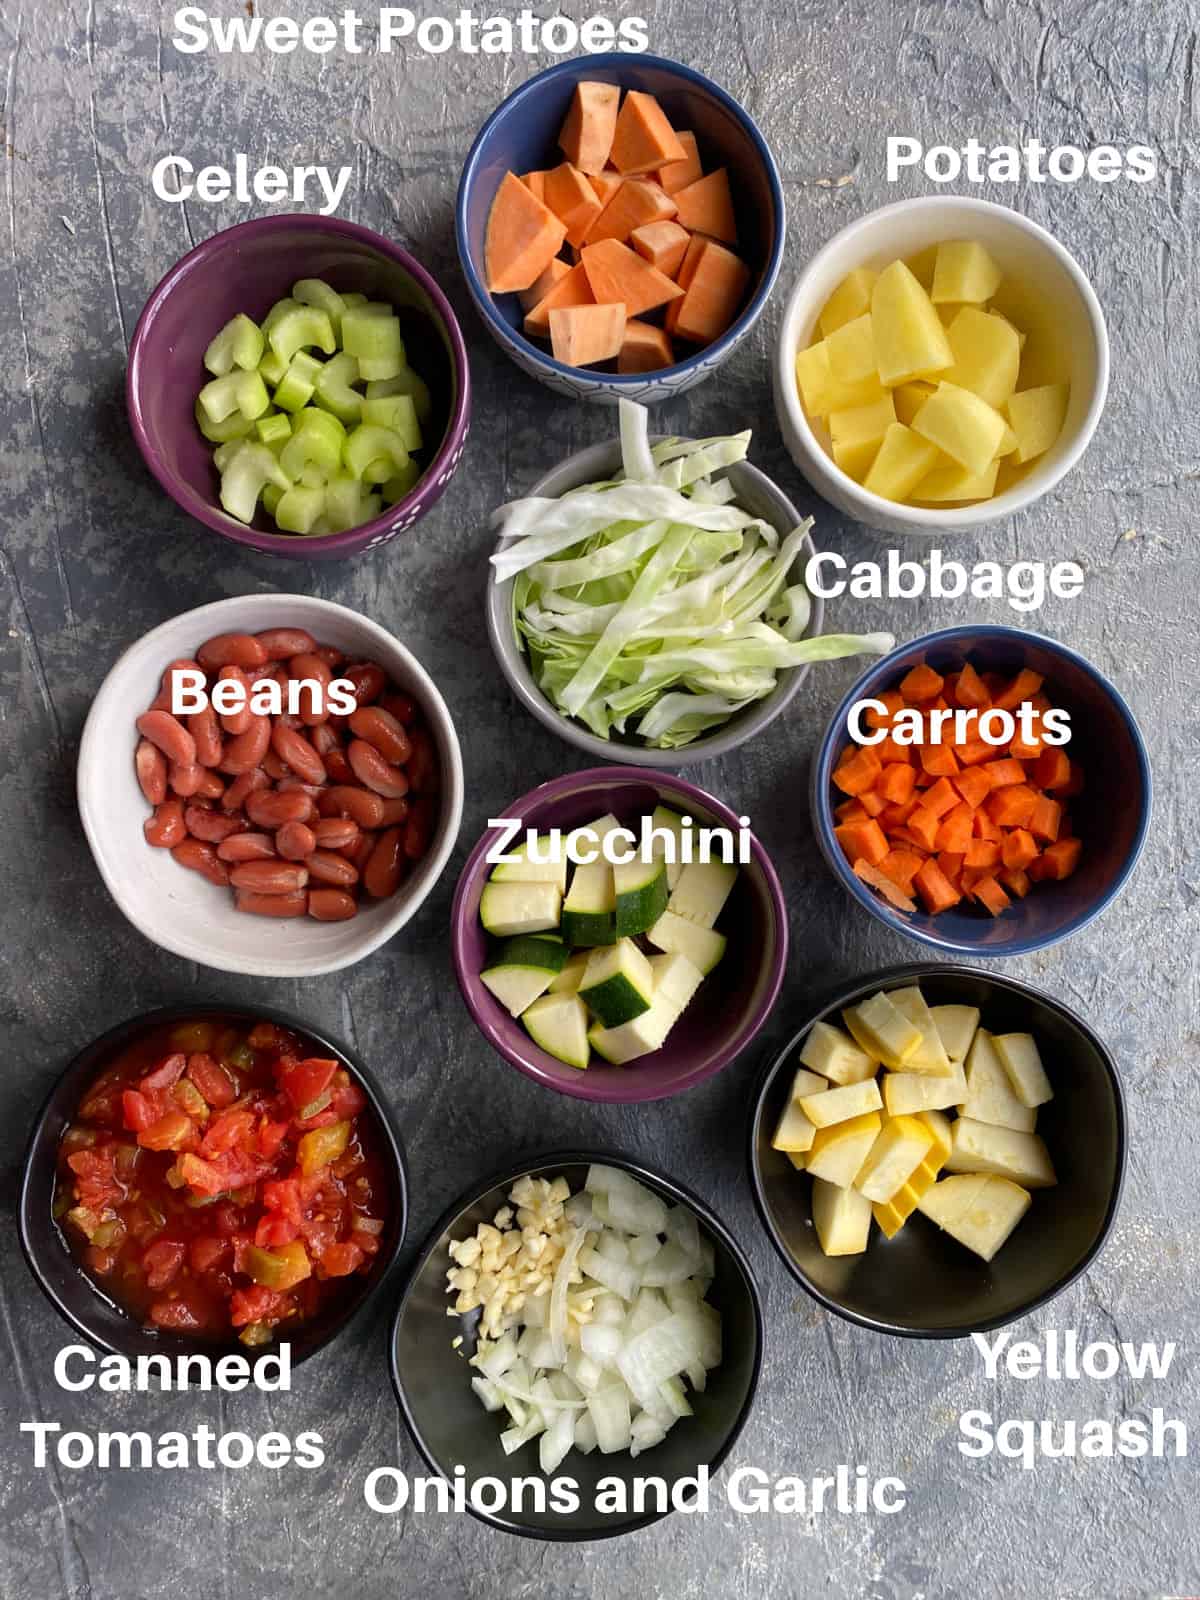 The ingredients to make cabbage soup in small bowls